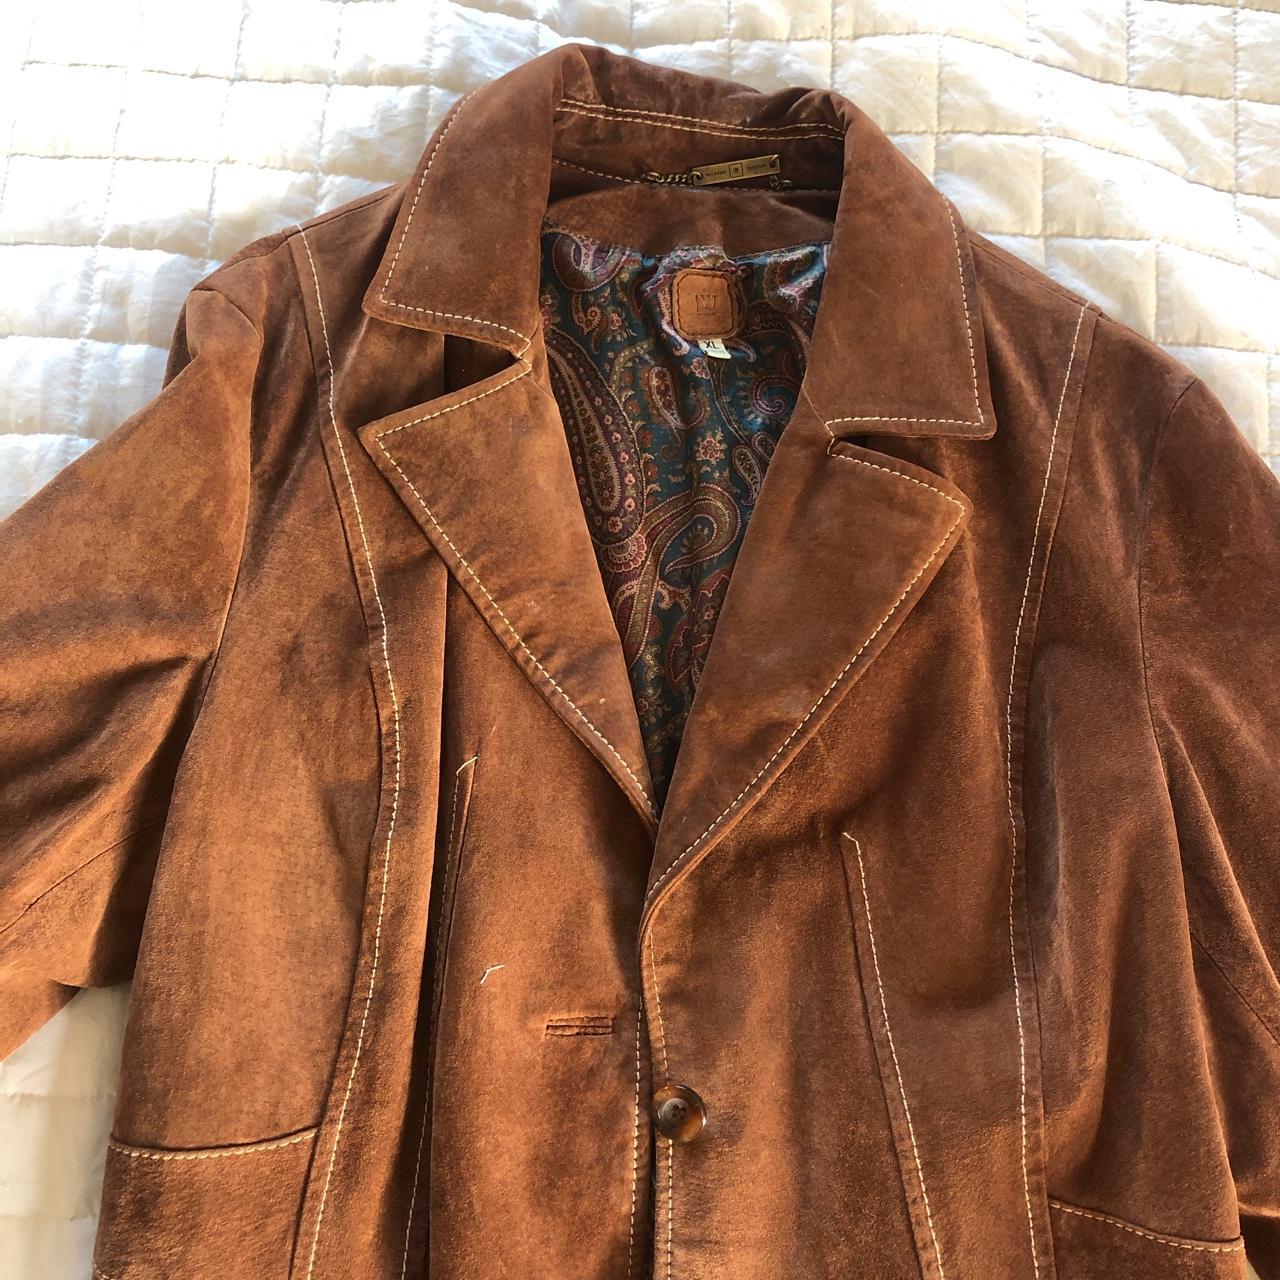 Wilson’s Leather Men's Tan and Brown Jacket